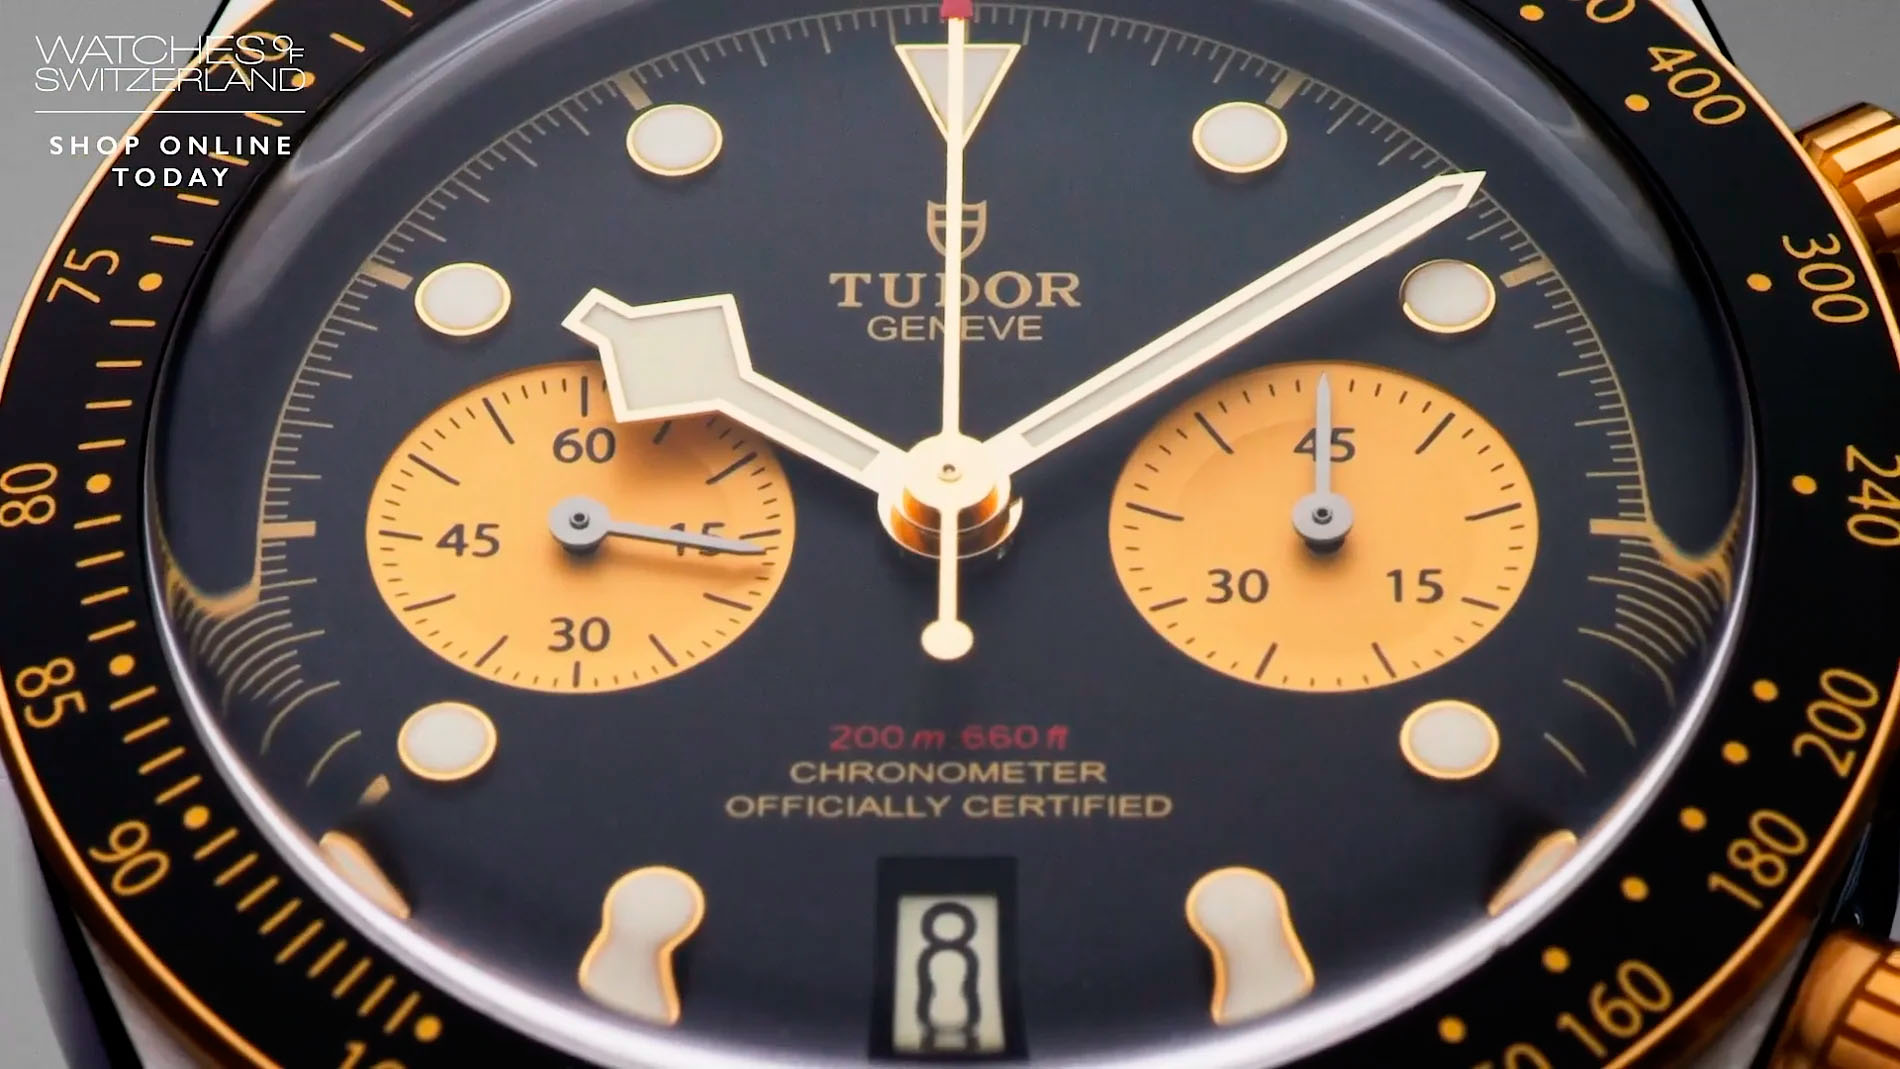 Advertising Product Film of Watches of Switzerland